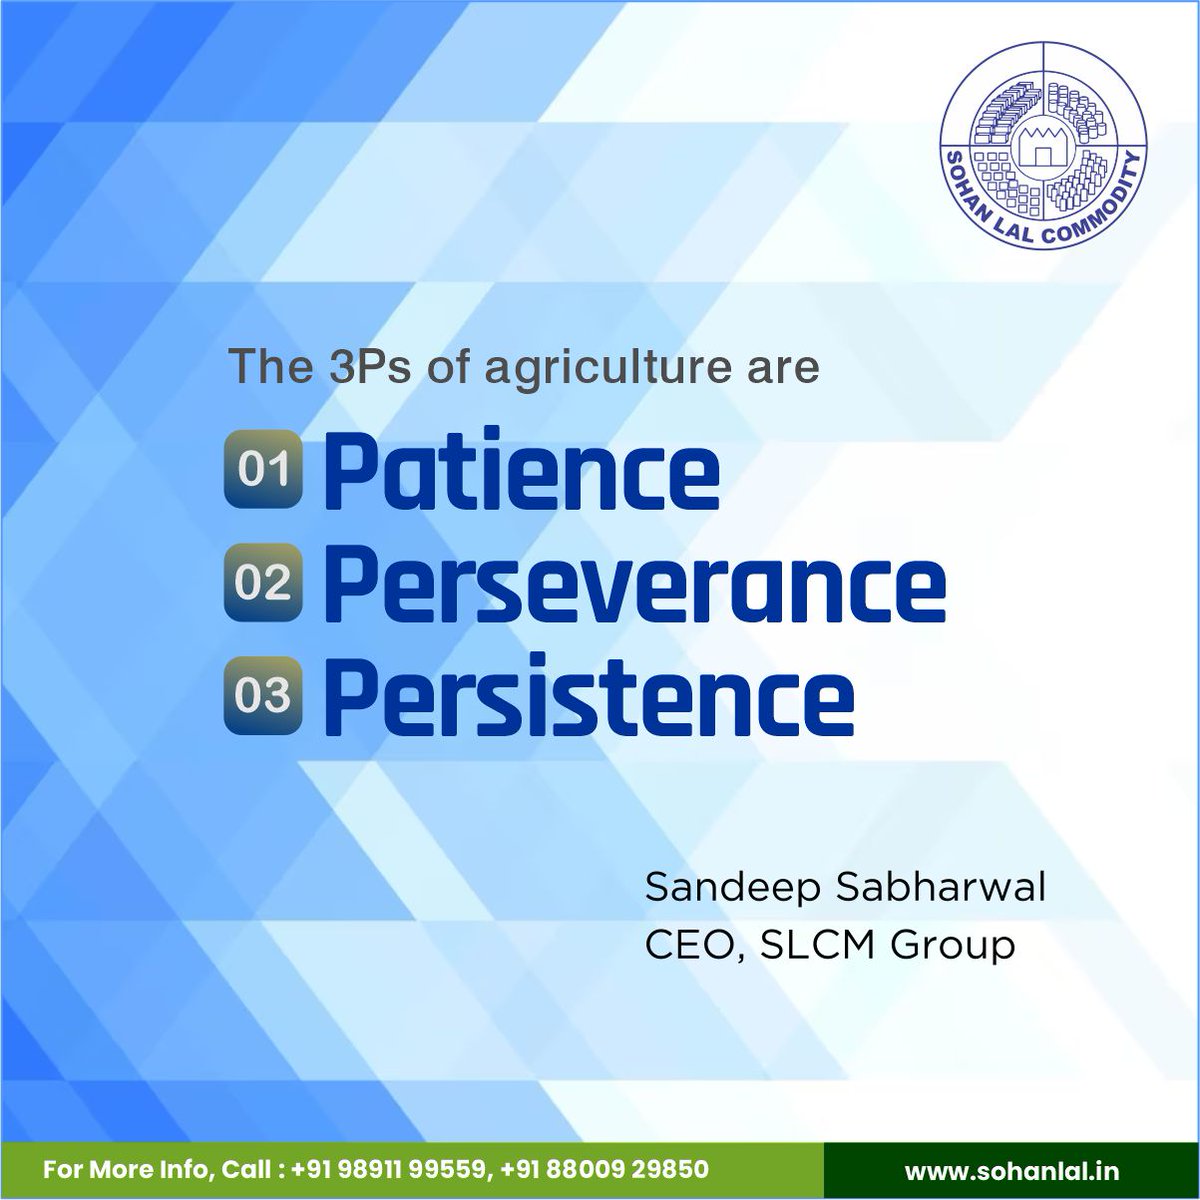 The 3Ps of #agriculture are Patience, Perseverance, and Persistence.

To know more, visit: sohanlal.in/services or contact: +91 9891199559, +91 8800929850 

#agrifinance #farmers #credit #warehouse #sohanlal #Agribusiness #AgriReach #AgriReachApp #sandeepsabharwal #ceospeaks